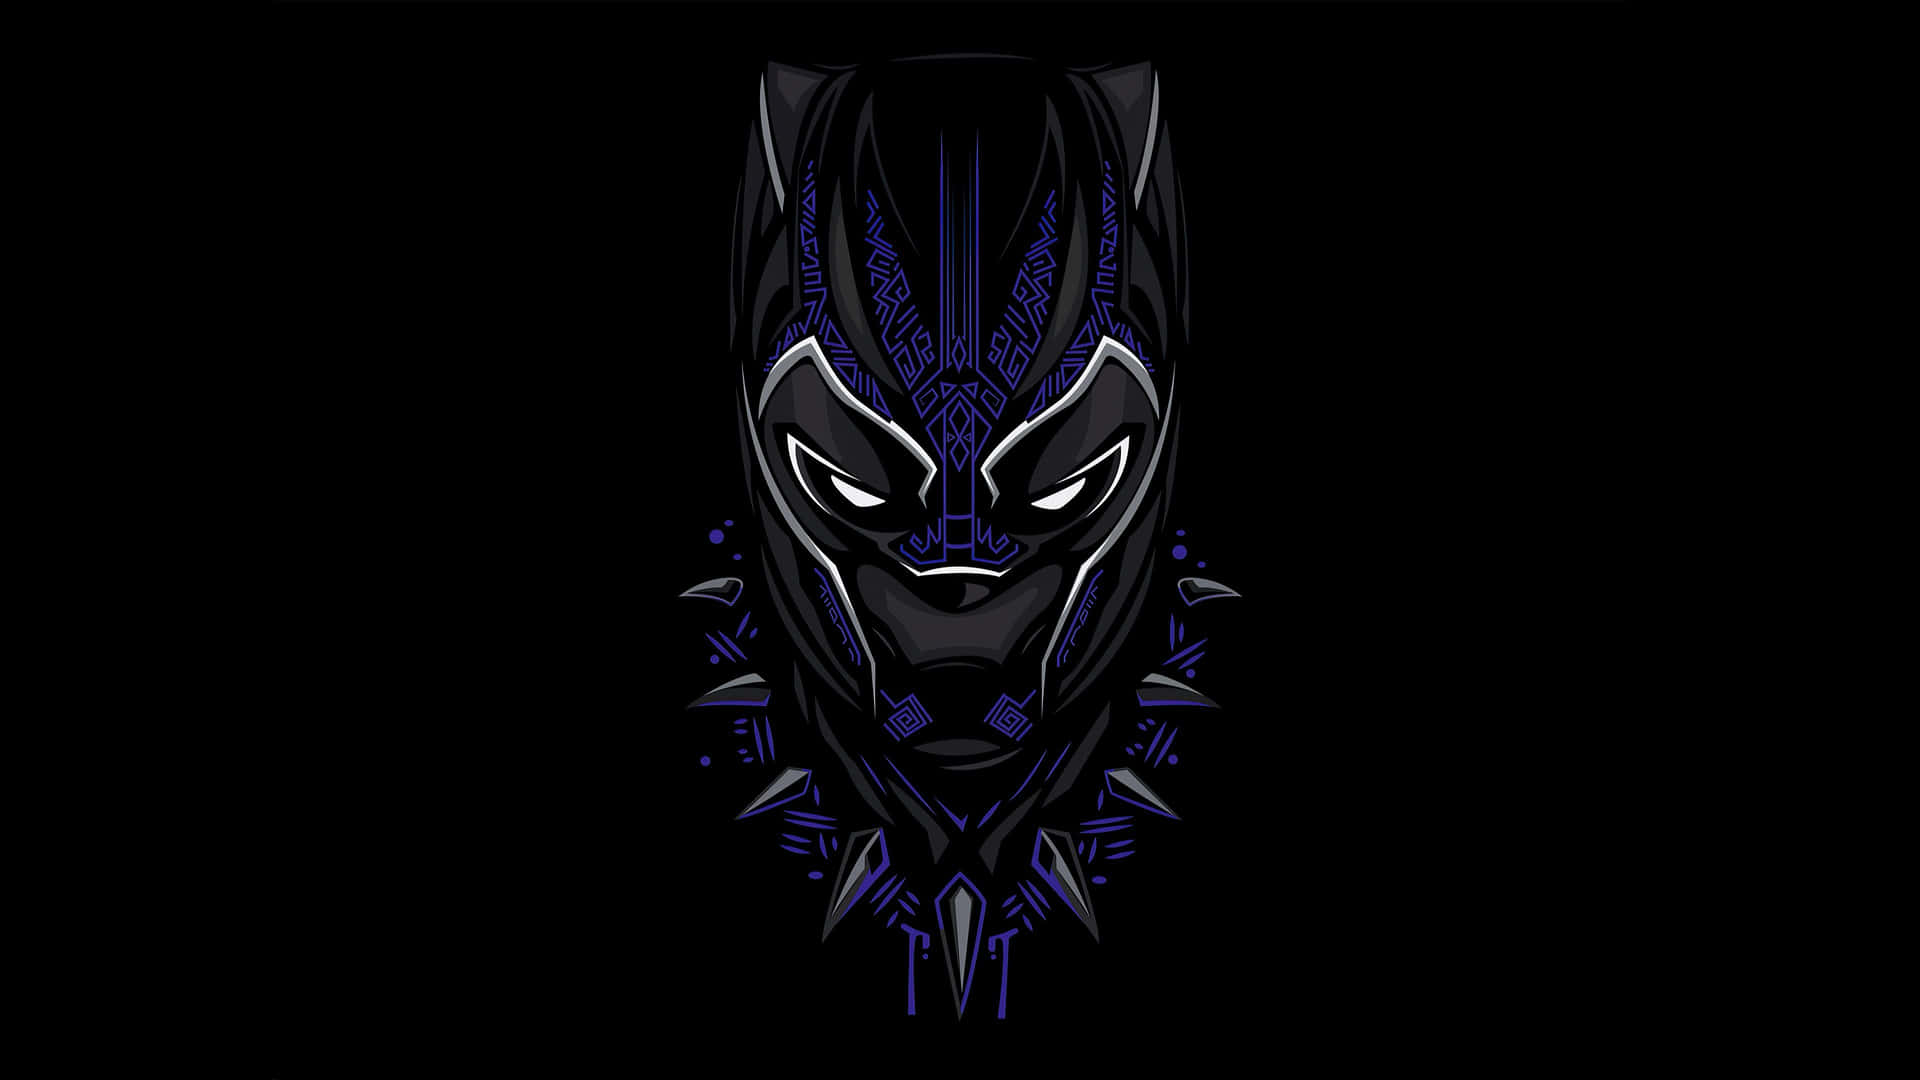 Bowing Head Of Black Panther Landscape Wallpaper